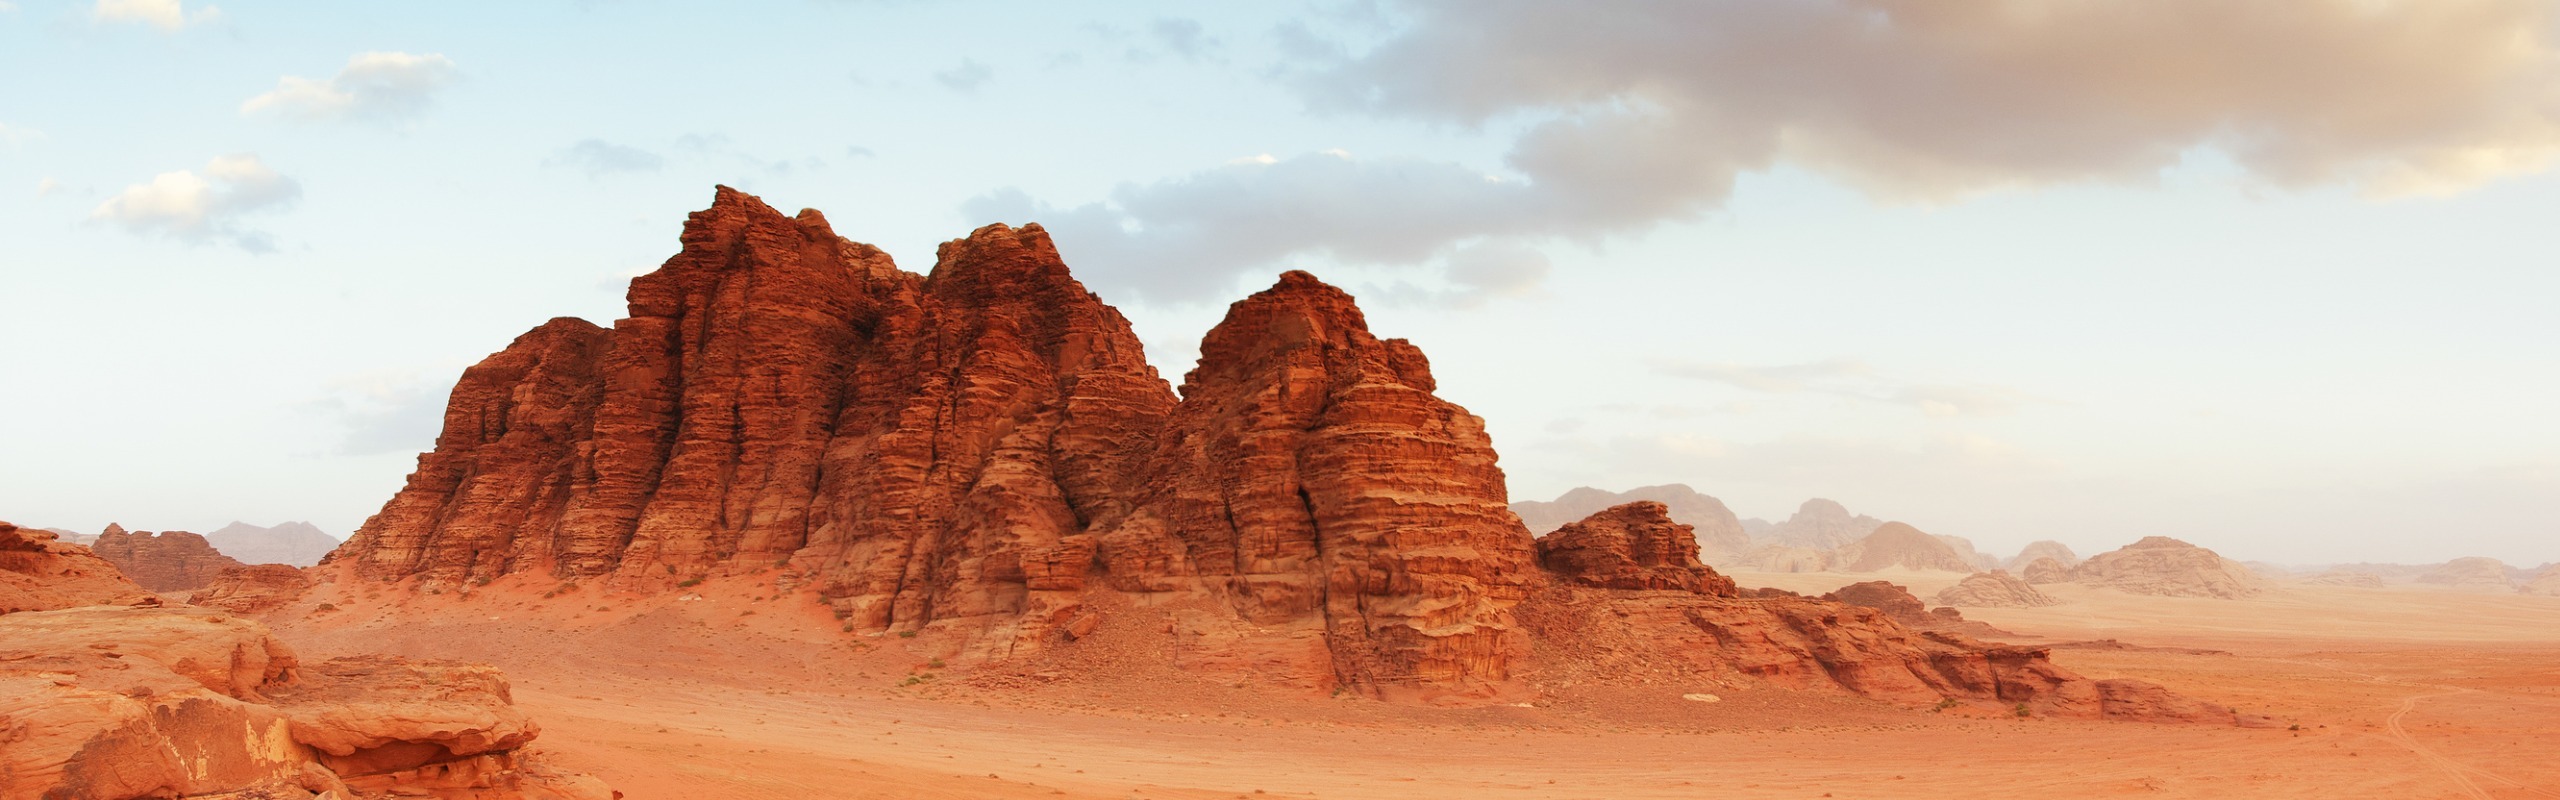 7 Days in Jordan: Top 3 Itineraries for First-Timers